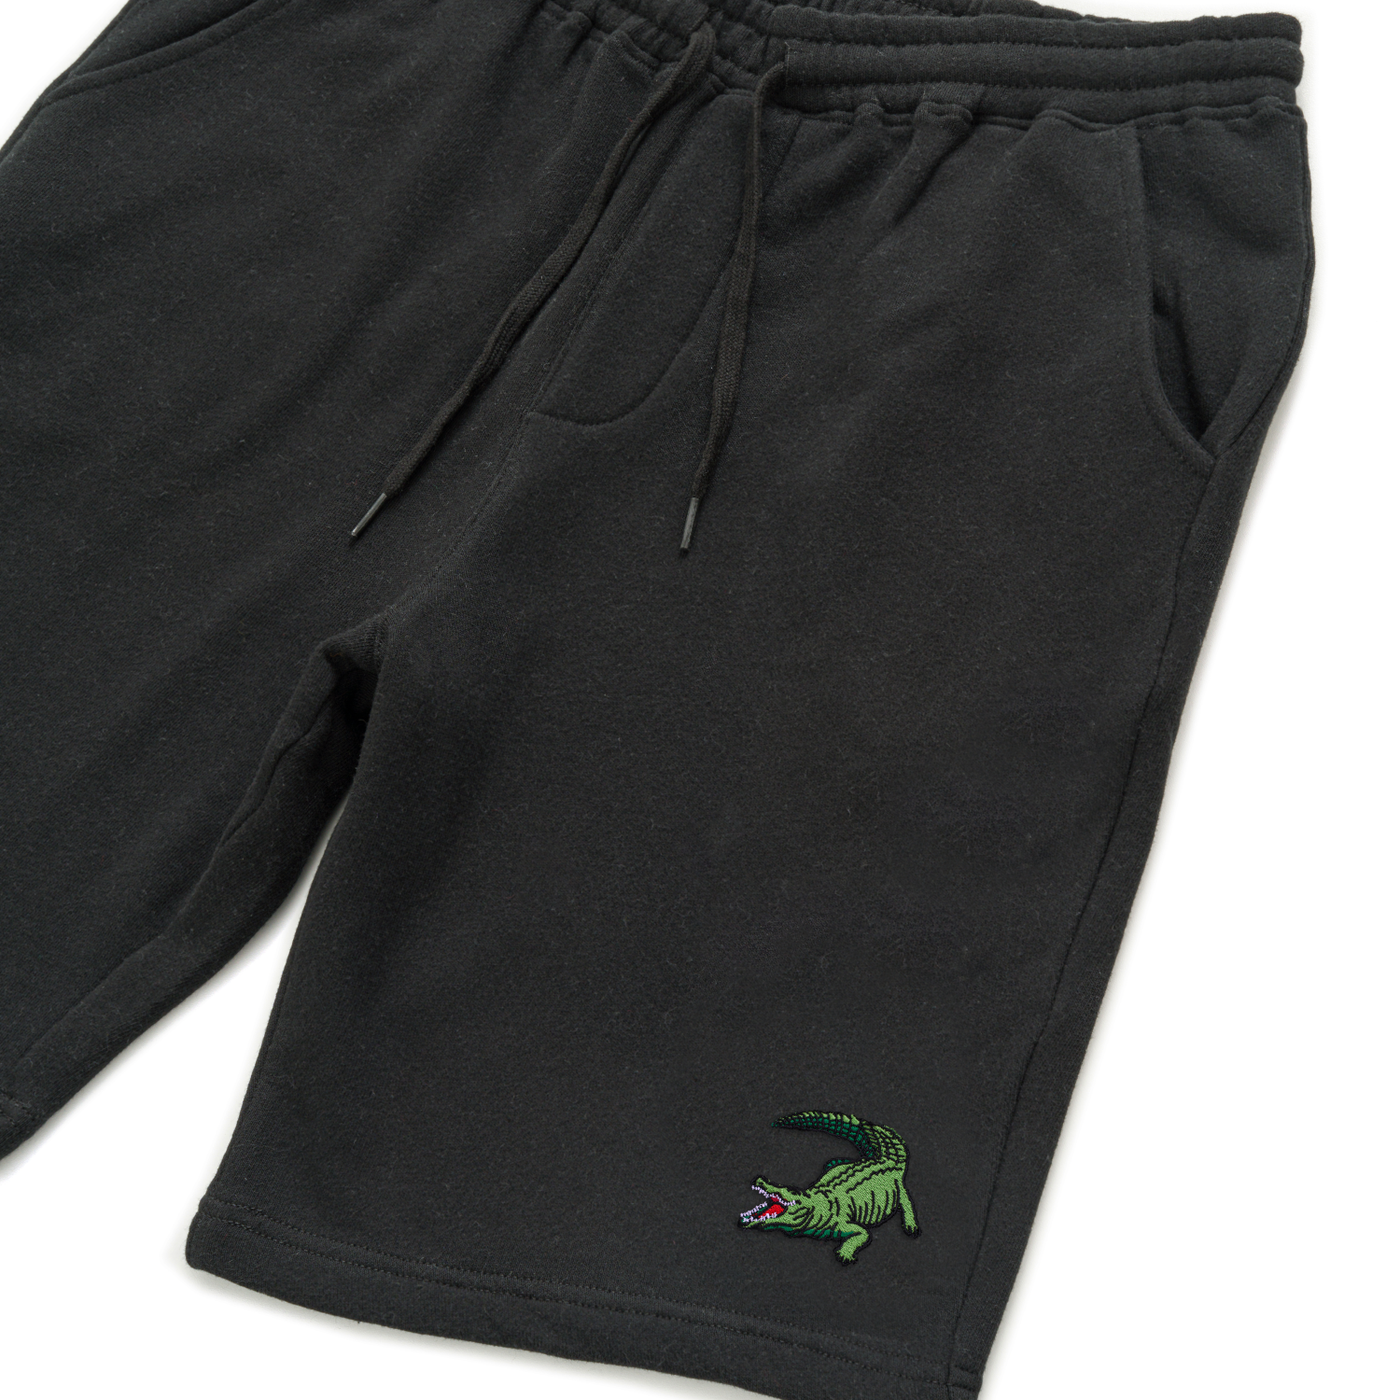 Bobby's Planet Men's Embroidered Saltwater Crocodile Shorts from Australia Down Under Animals Collection in Black Color#color_black